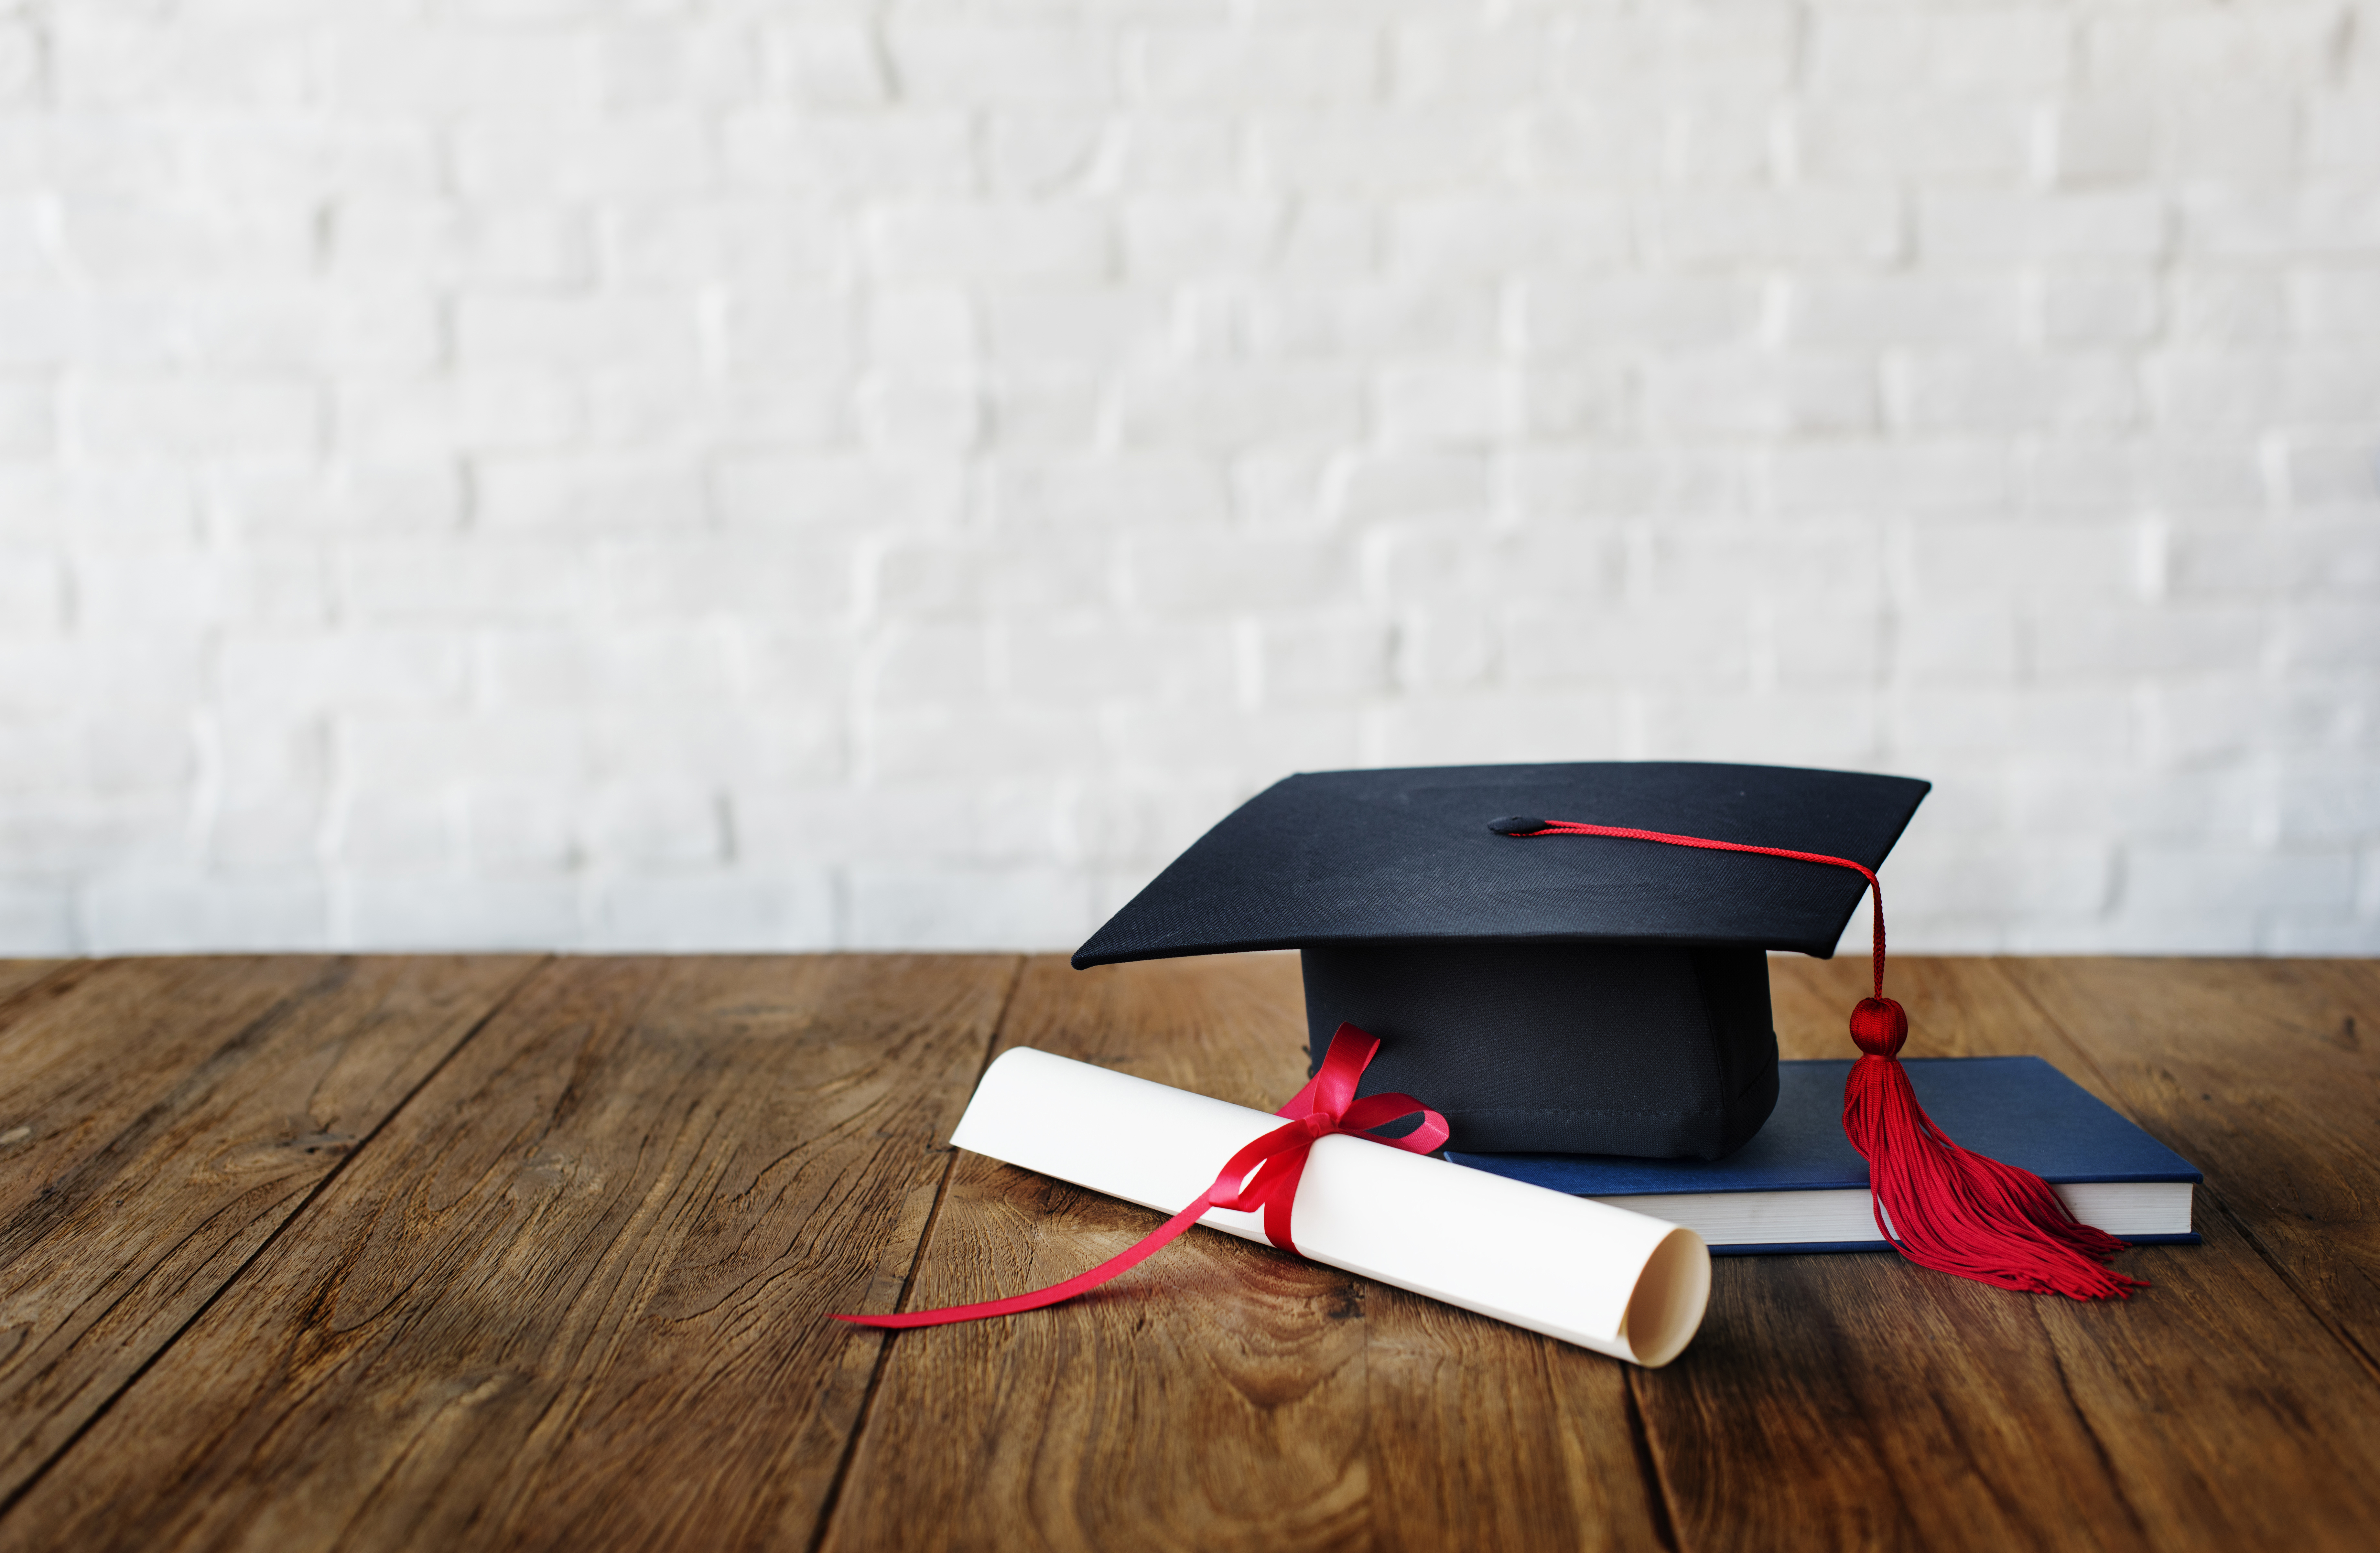 Pictured is a diploma and graduation cap. SHUTTERSTOCK/ Rawpixel.com